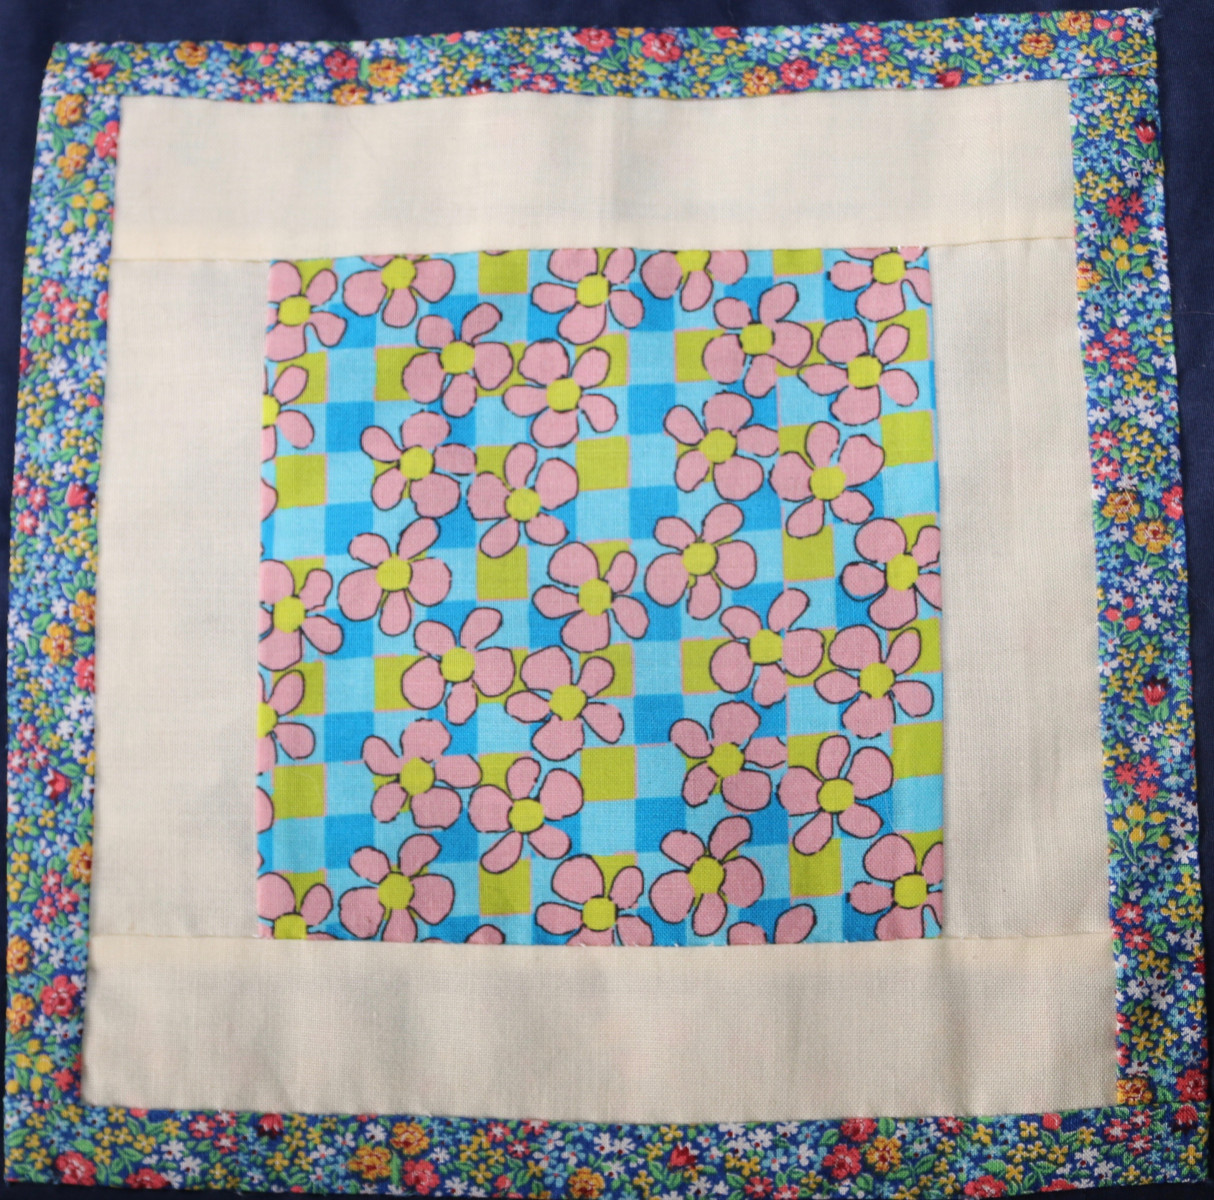 Image of 3 concentric patchwork squares - large floral print in middle, plain cream, then small floral print